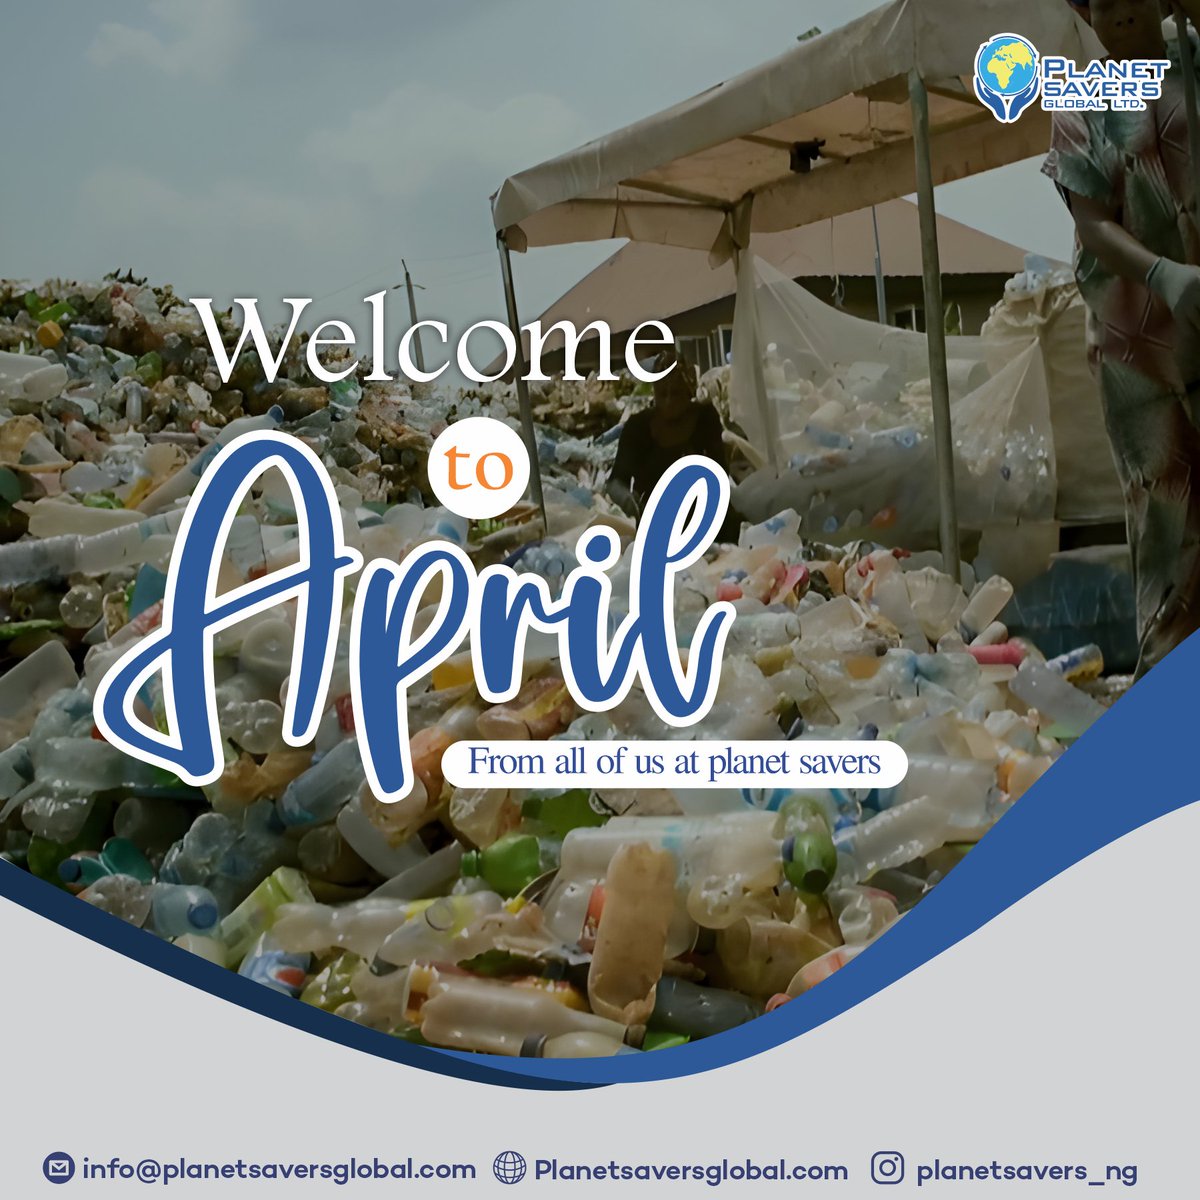 It's April!
The beginning of the second quarter of the year.
Cheers to a new month and another chance for you to realign your plans to achieve your goals for the year. 

From all of us at Planet Savers Global, we wish you a fulfilling month.

#psglobal
#recyclingcompany